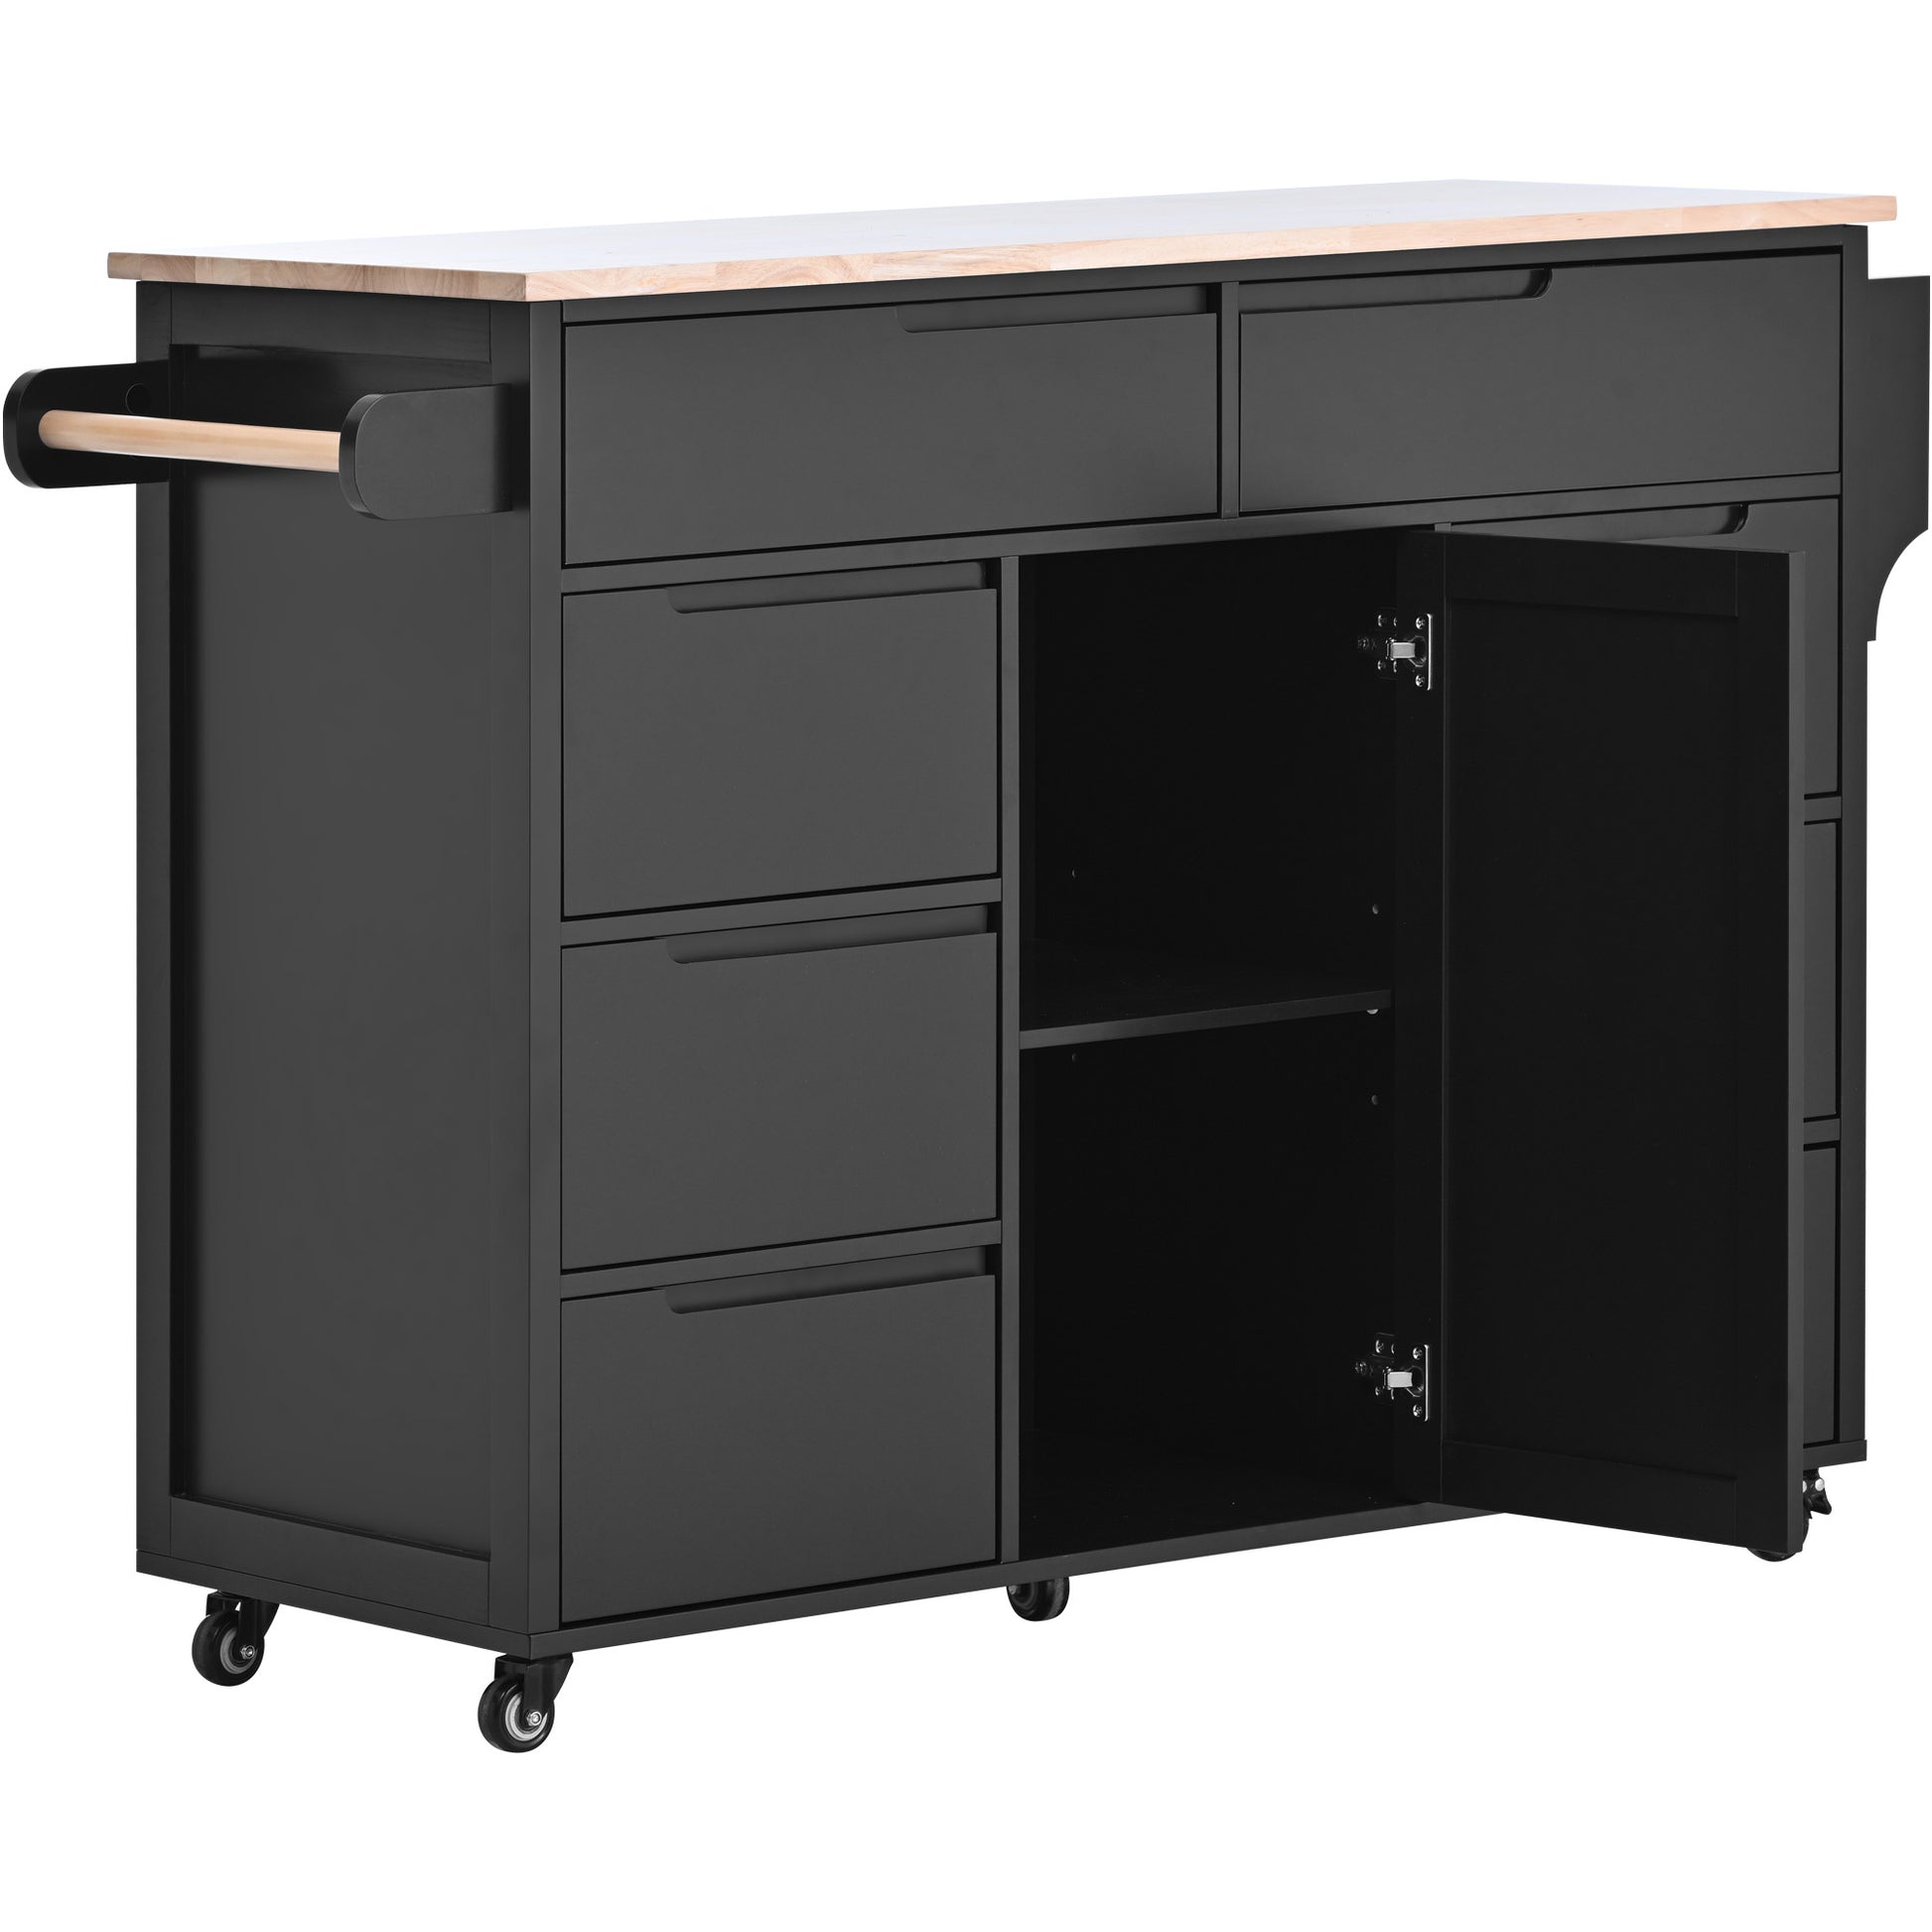 Kitchen Cart with Rubber Wood Countertop black-mdf